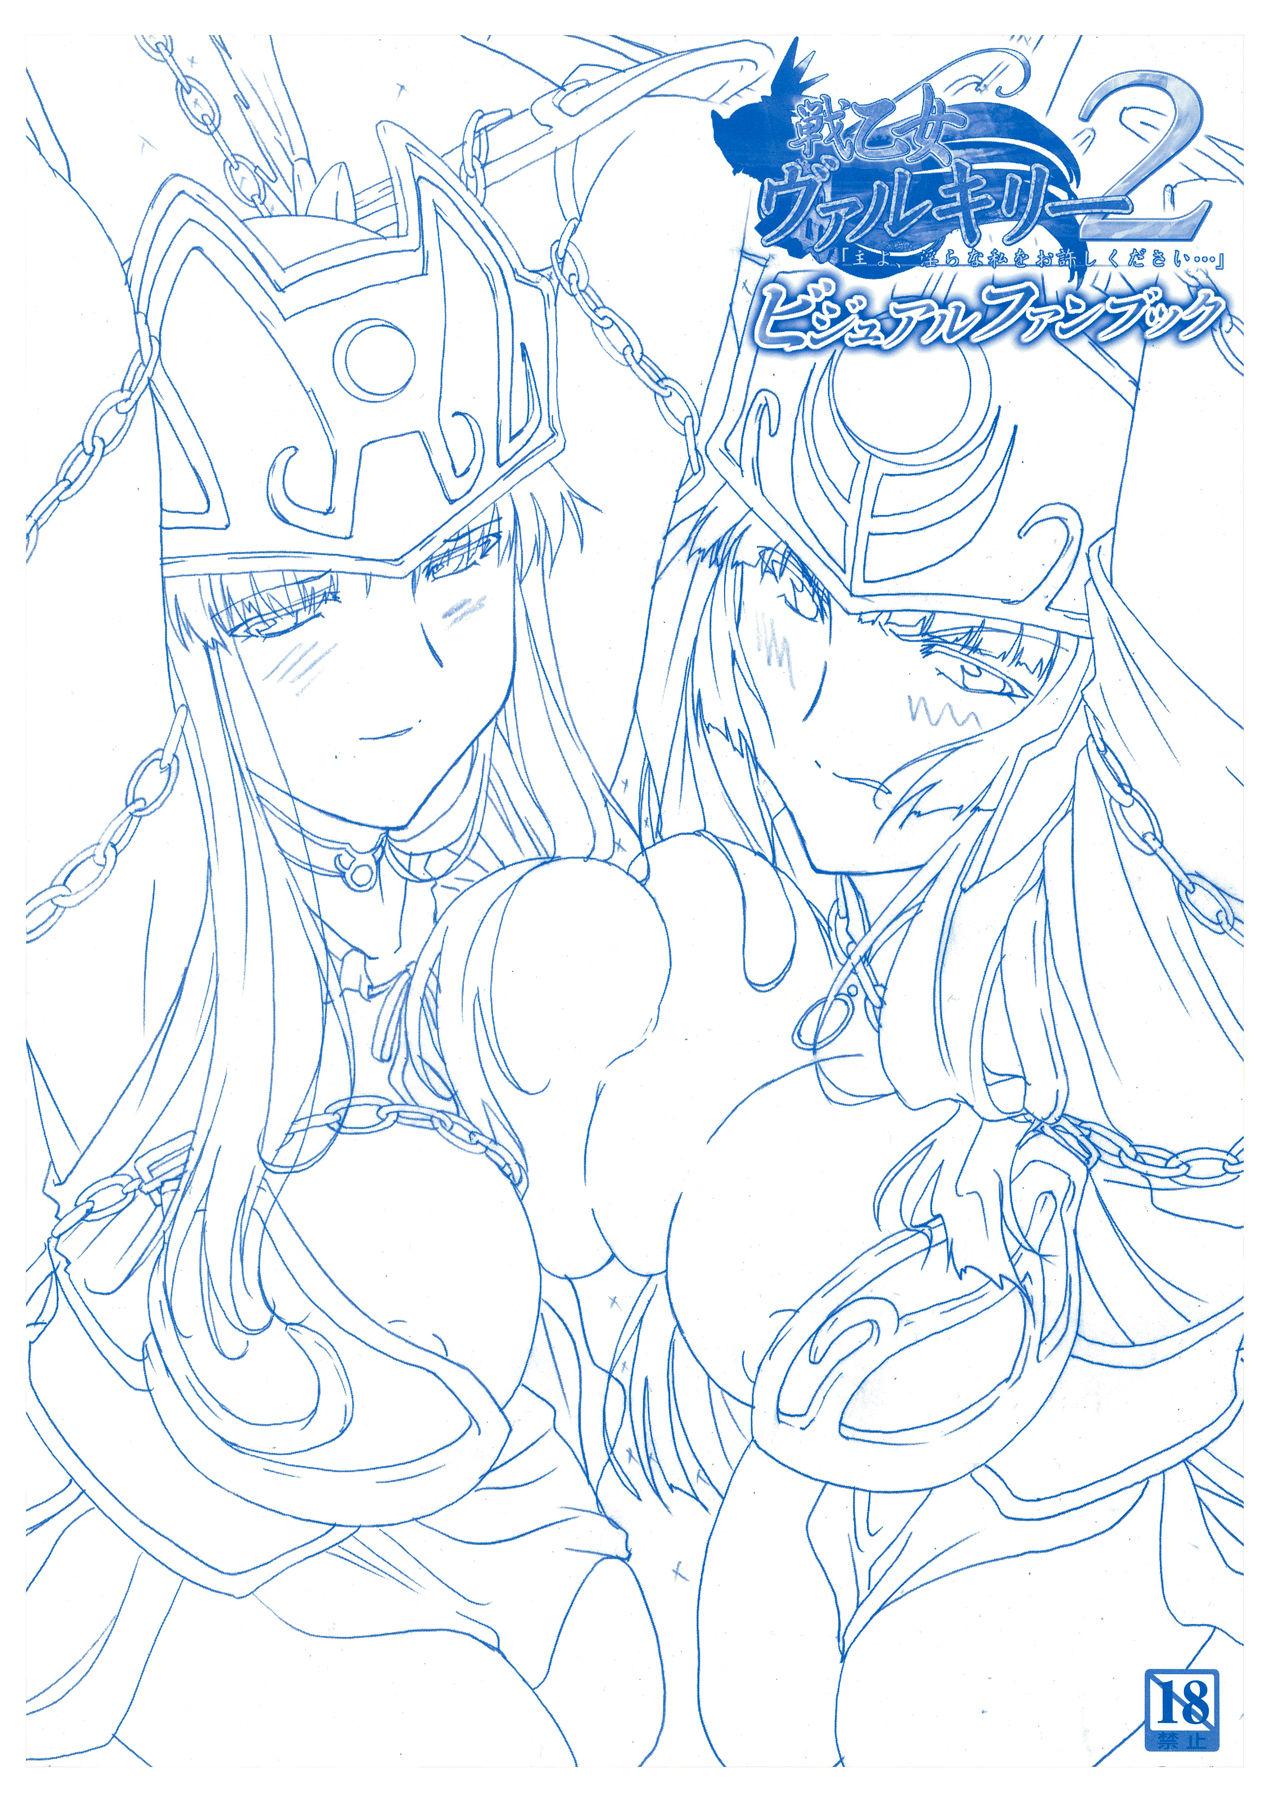 Oldyoung Ikusa Otome Valkyrie 2 Visual Fanbook - Ikusa otome valkyrie Web Cam - Picture 2